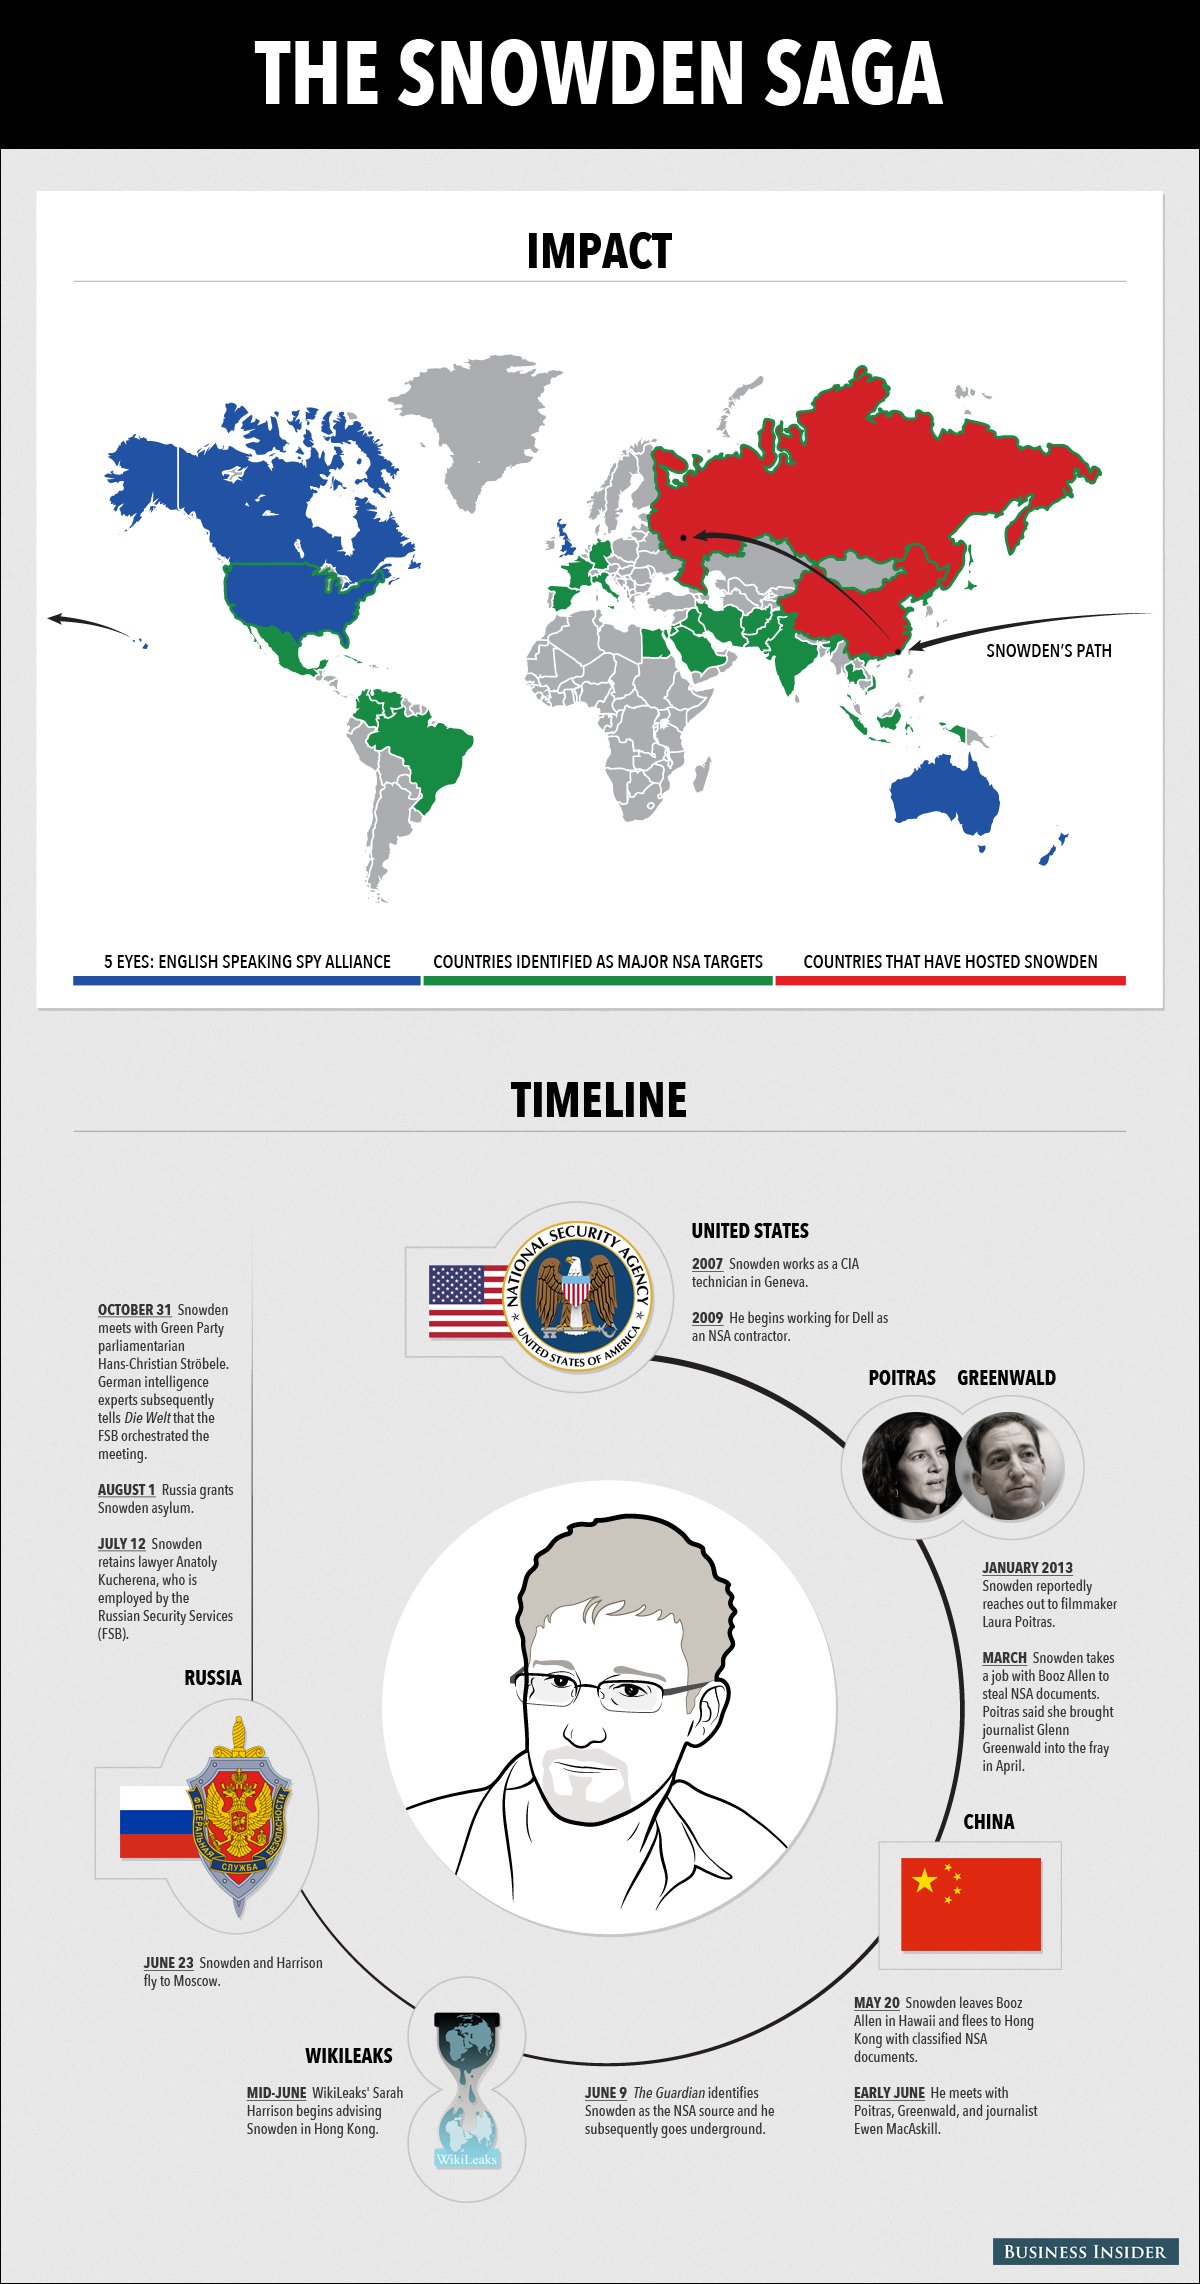 Not following the Edward Snowden story? This infographic will get you up to speed